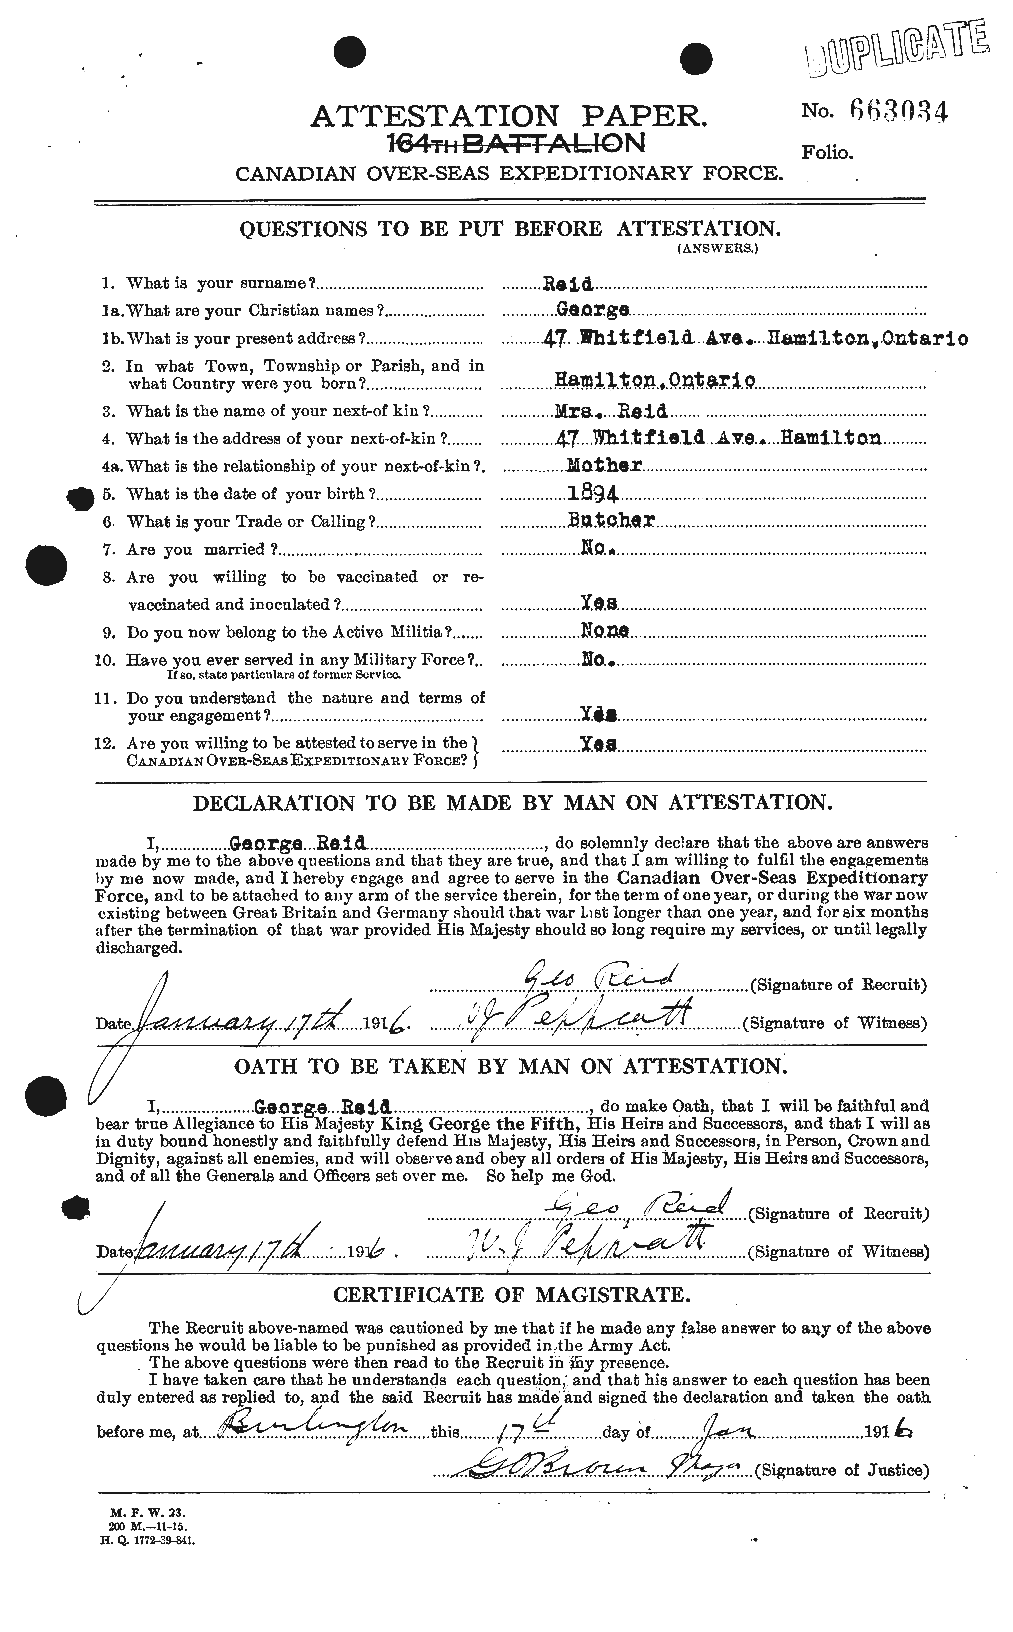 Personnel Records of the First World War - CEF 596270a